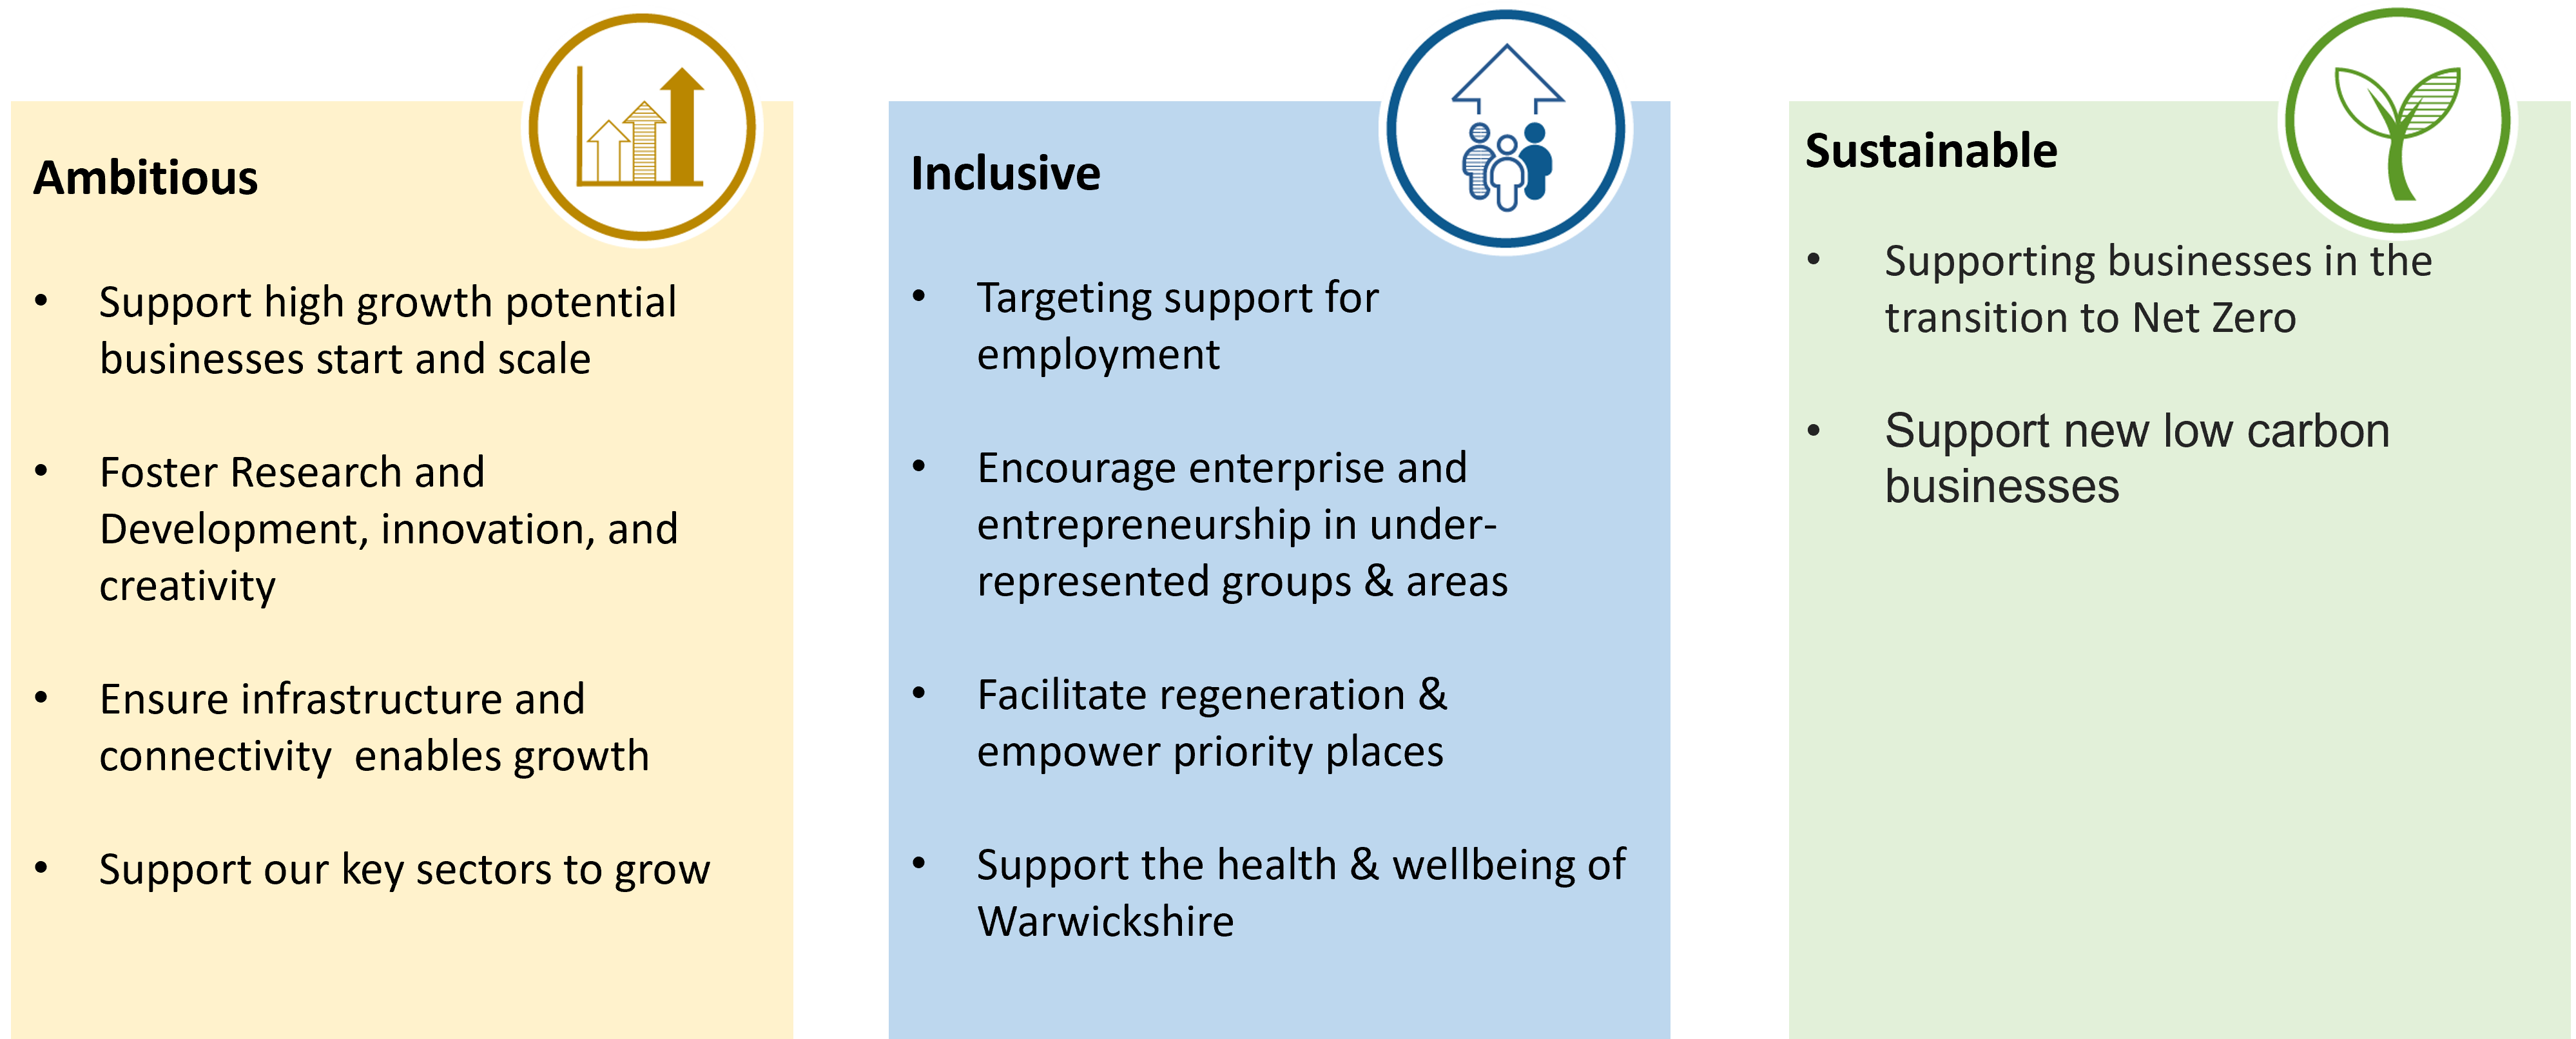 Image shows three boxes. The first box 'Ambitious' has 4 bullet points: Support high growth potential businesses start and scale; Foster Research and Development, innovation, and creativity​; Ensure infrastructure and connectivity enables growth​; Support our key sectors to grow . The second box ' Inclusive' has five bullet points: ​Targeting support for employment ; Raise aspirations and develop career pathways ; Encourage enterprise and entrepreneurship in under-represented groups & areas ; Facilitate regeneration & empower priority places;  Support the health & wellbeing of Warwickshire. The third box 'Sustainable' has five bullet points:  Support our businesses transition to Net Zero; Support our businesses to reuse, recycle and reduce waste in order to create cost reductions and lower the use of fossil fuels; Support existing low carbon technology businesses and enable of new ones to move to the county; Make sure we have the right skills to support and capitalise on the shift to a low carbon economy; Facilitate decarbonising transport.